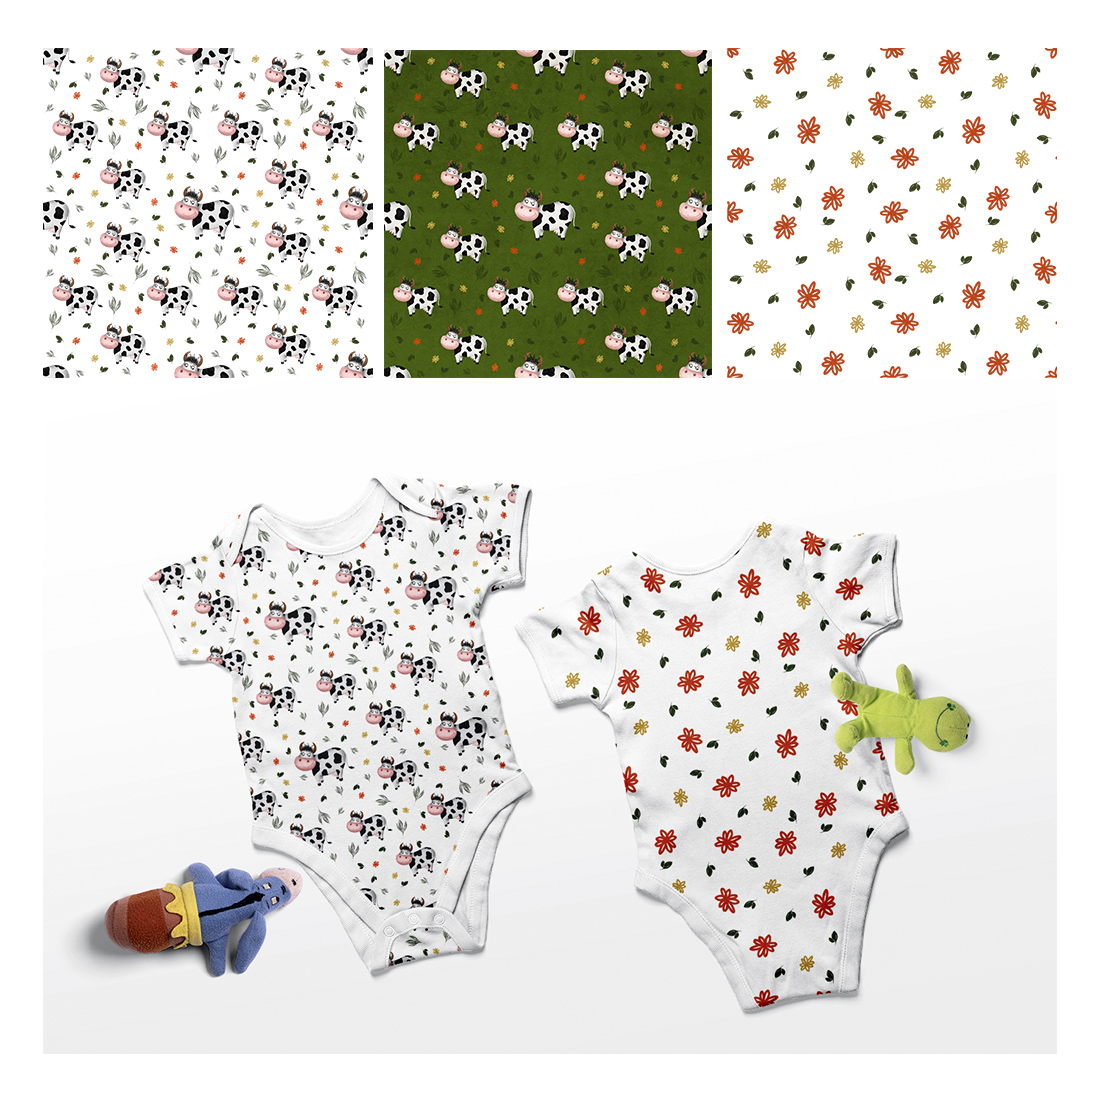 Cute Cow Patterns & Illustrations